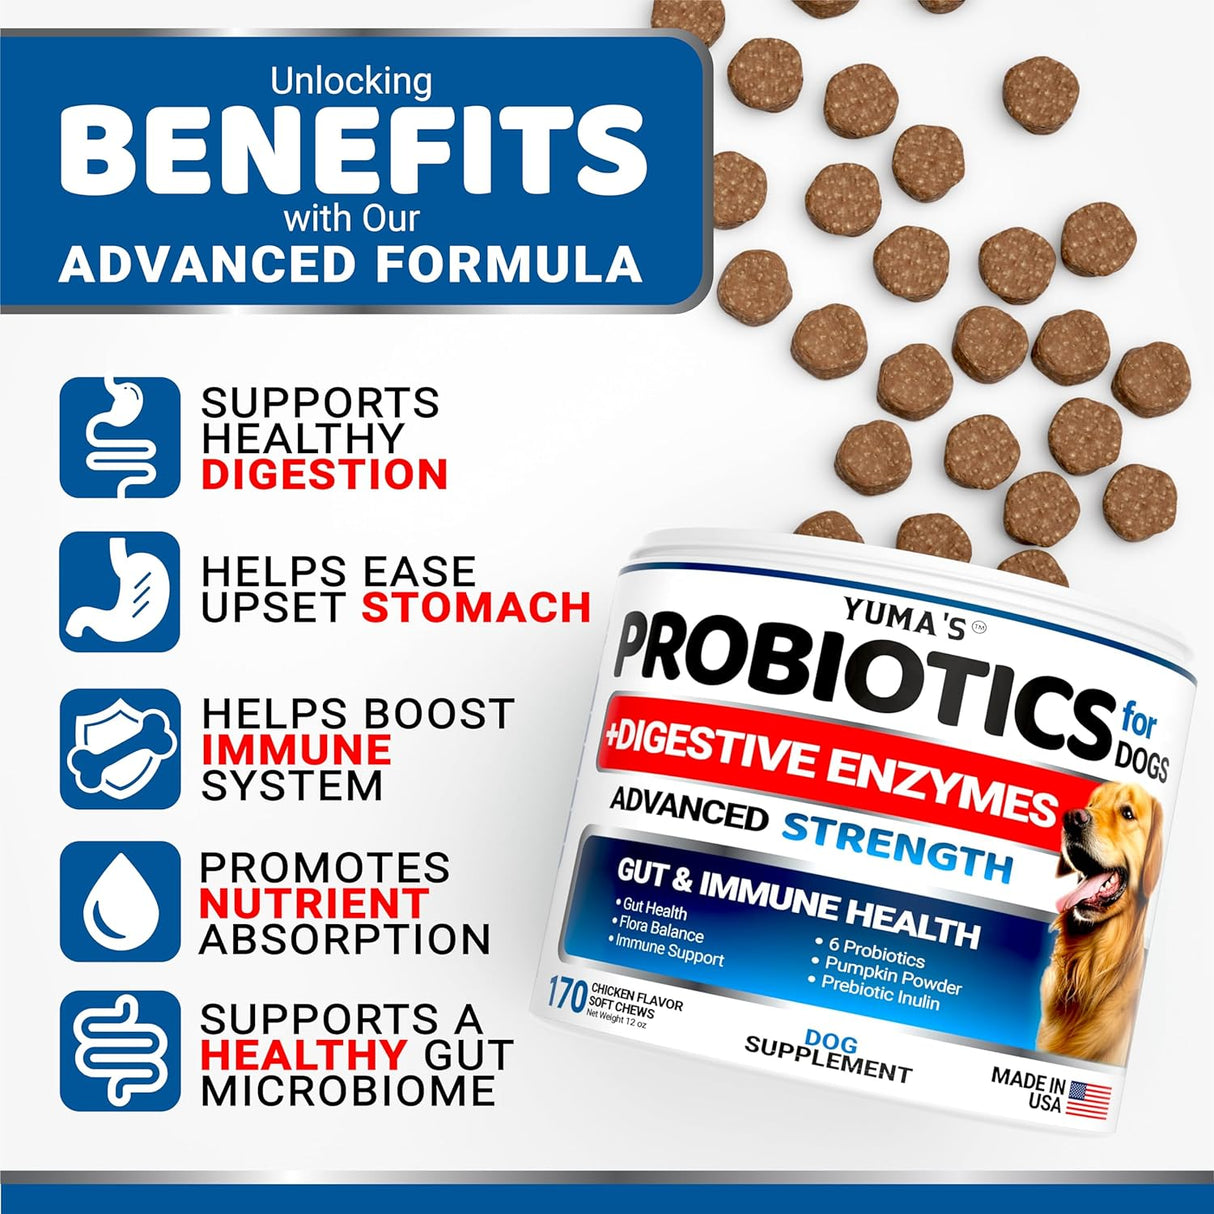 YUMA'S Probiotics for Dogs and Digestive Enzymes 170 Masticables